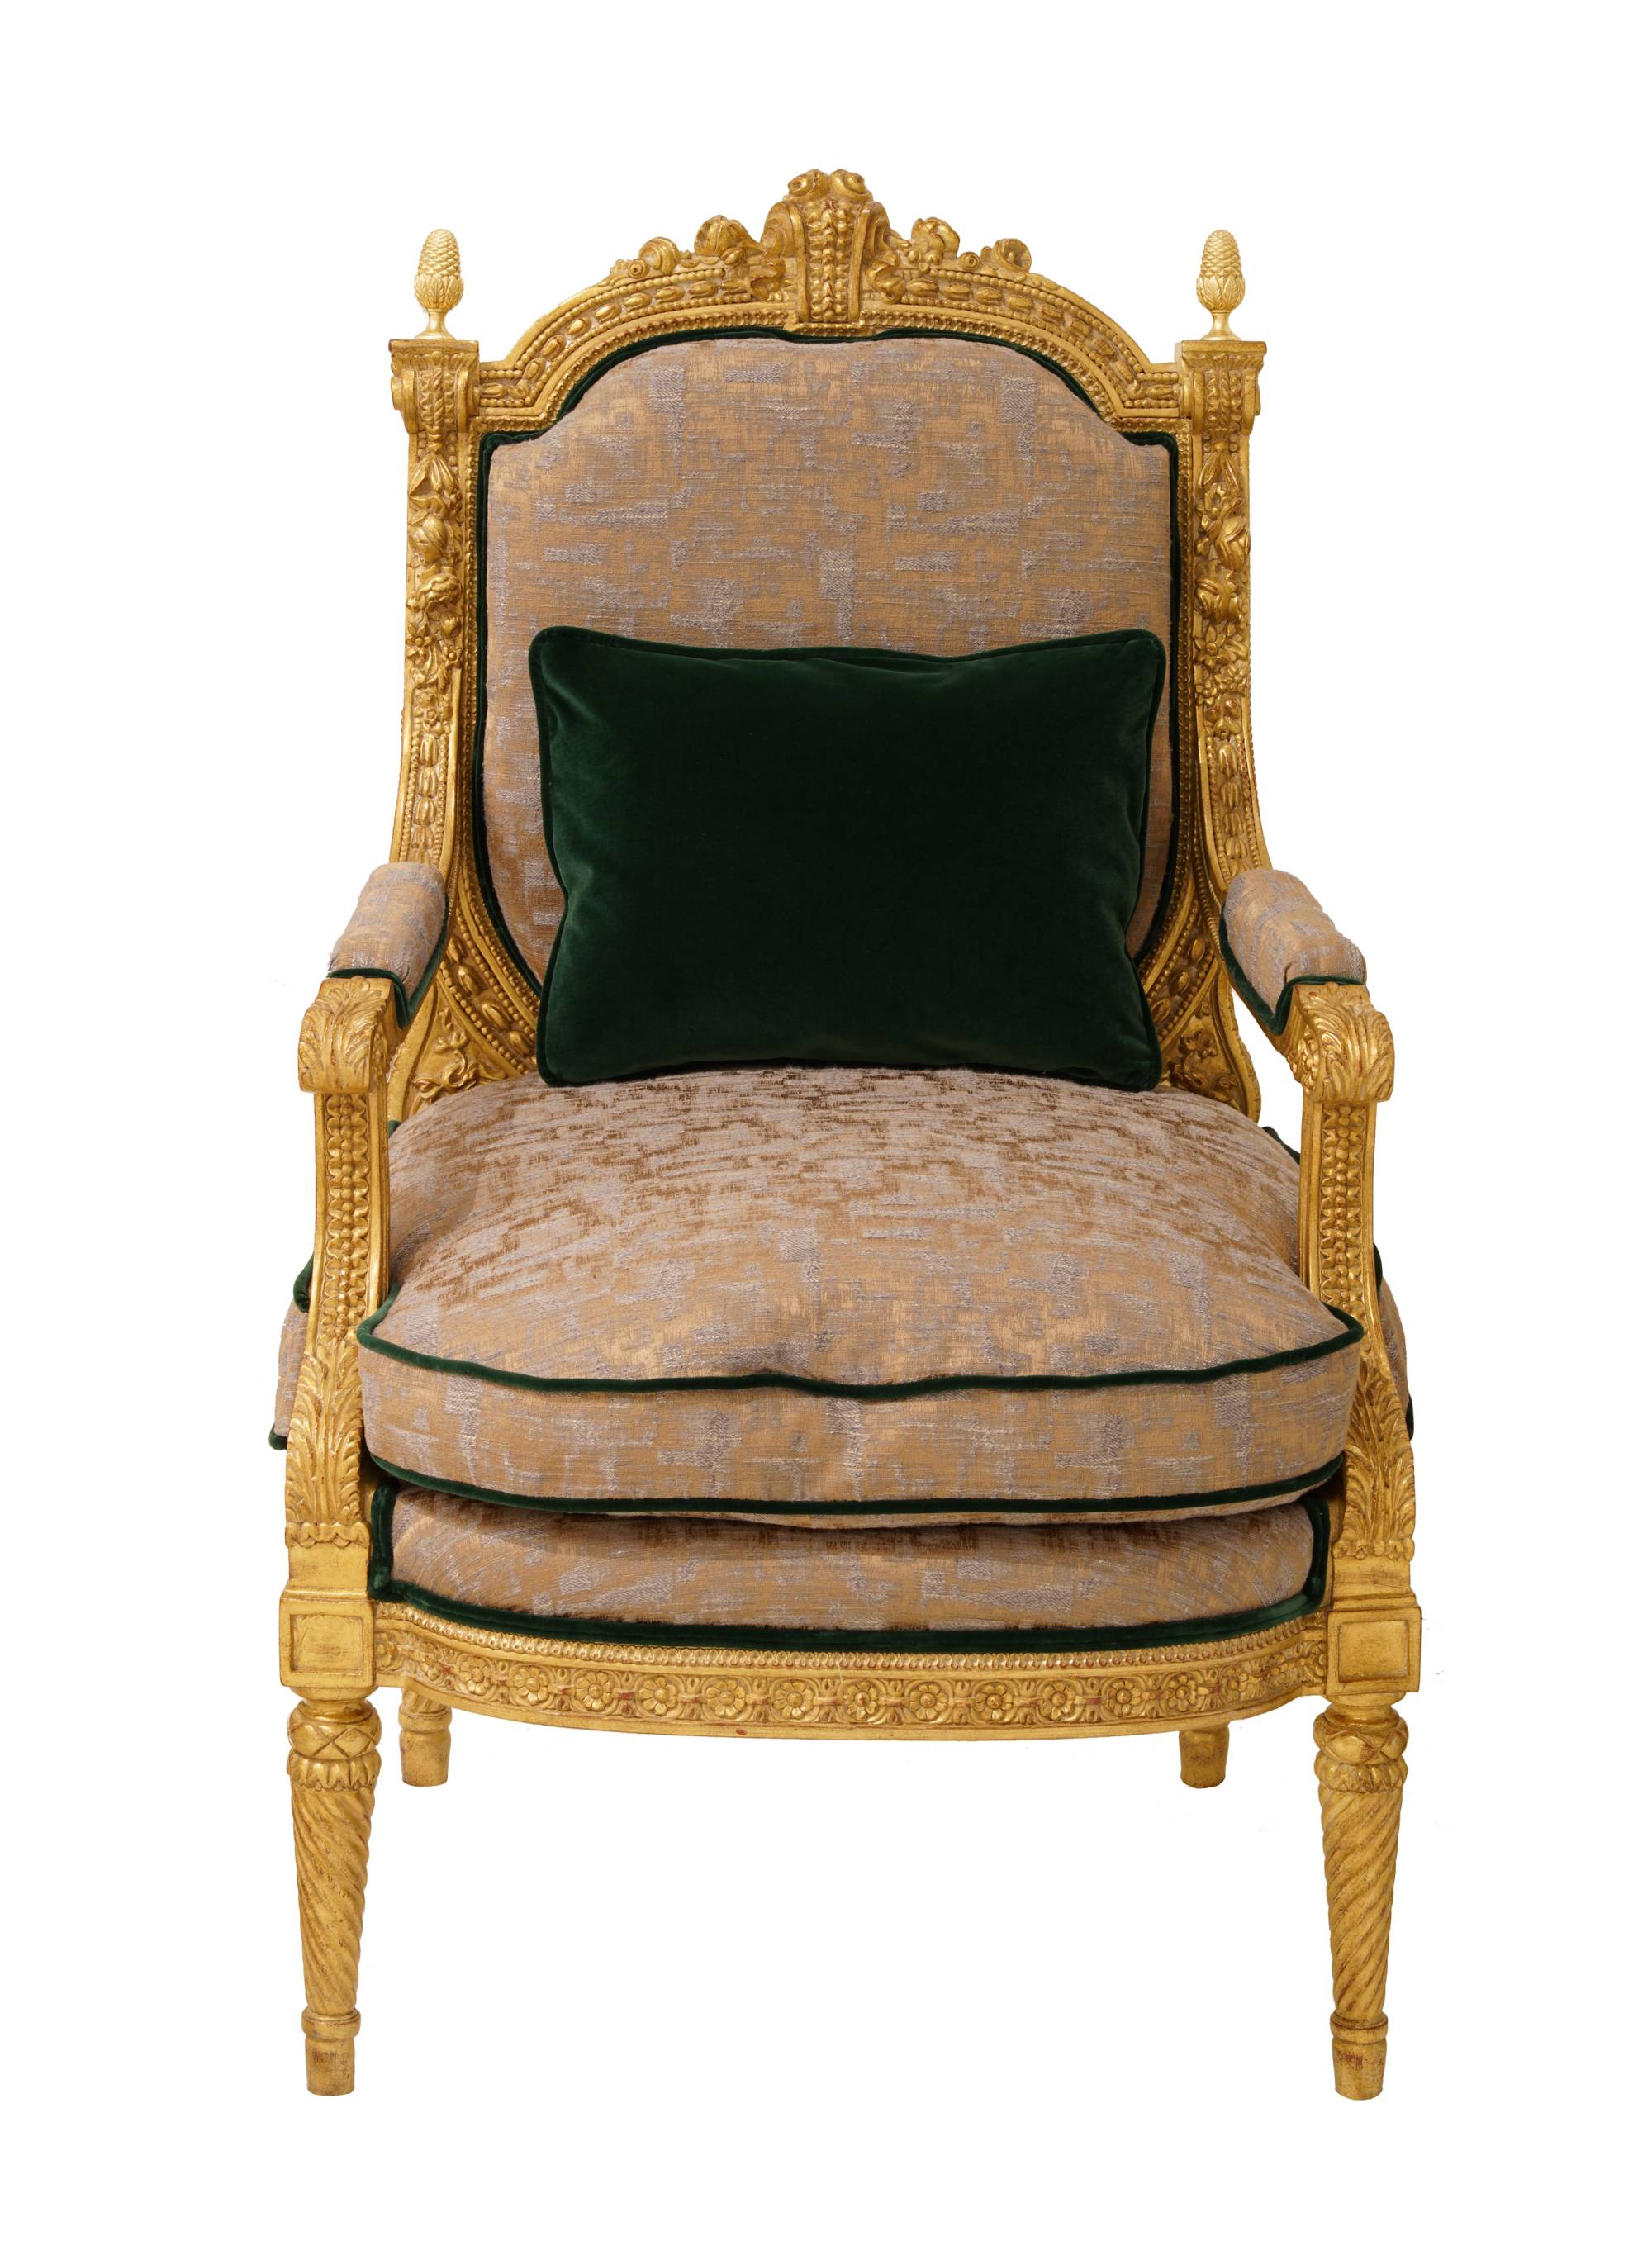 ART. 756-1 - C.G. Capelletti quality furniture and timeless elegance with luxury made in italy contemporary Armchairs.